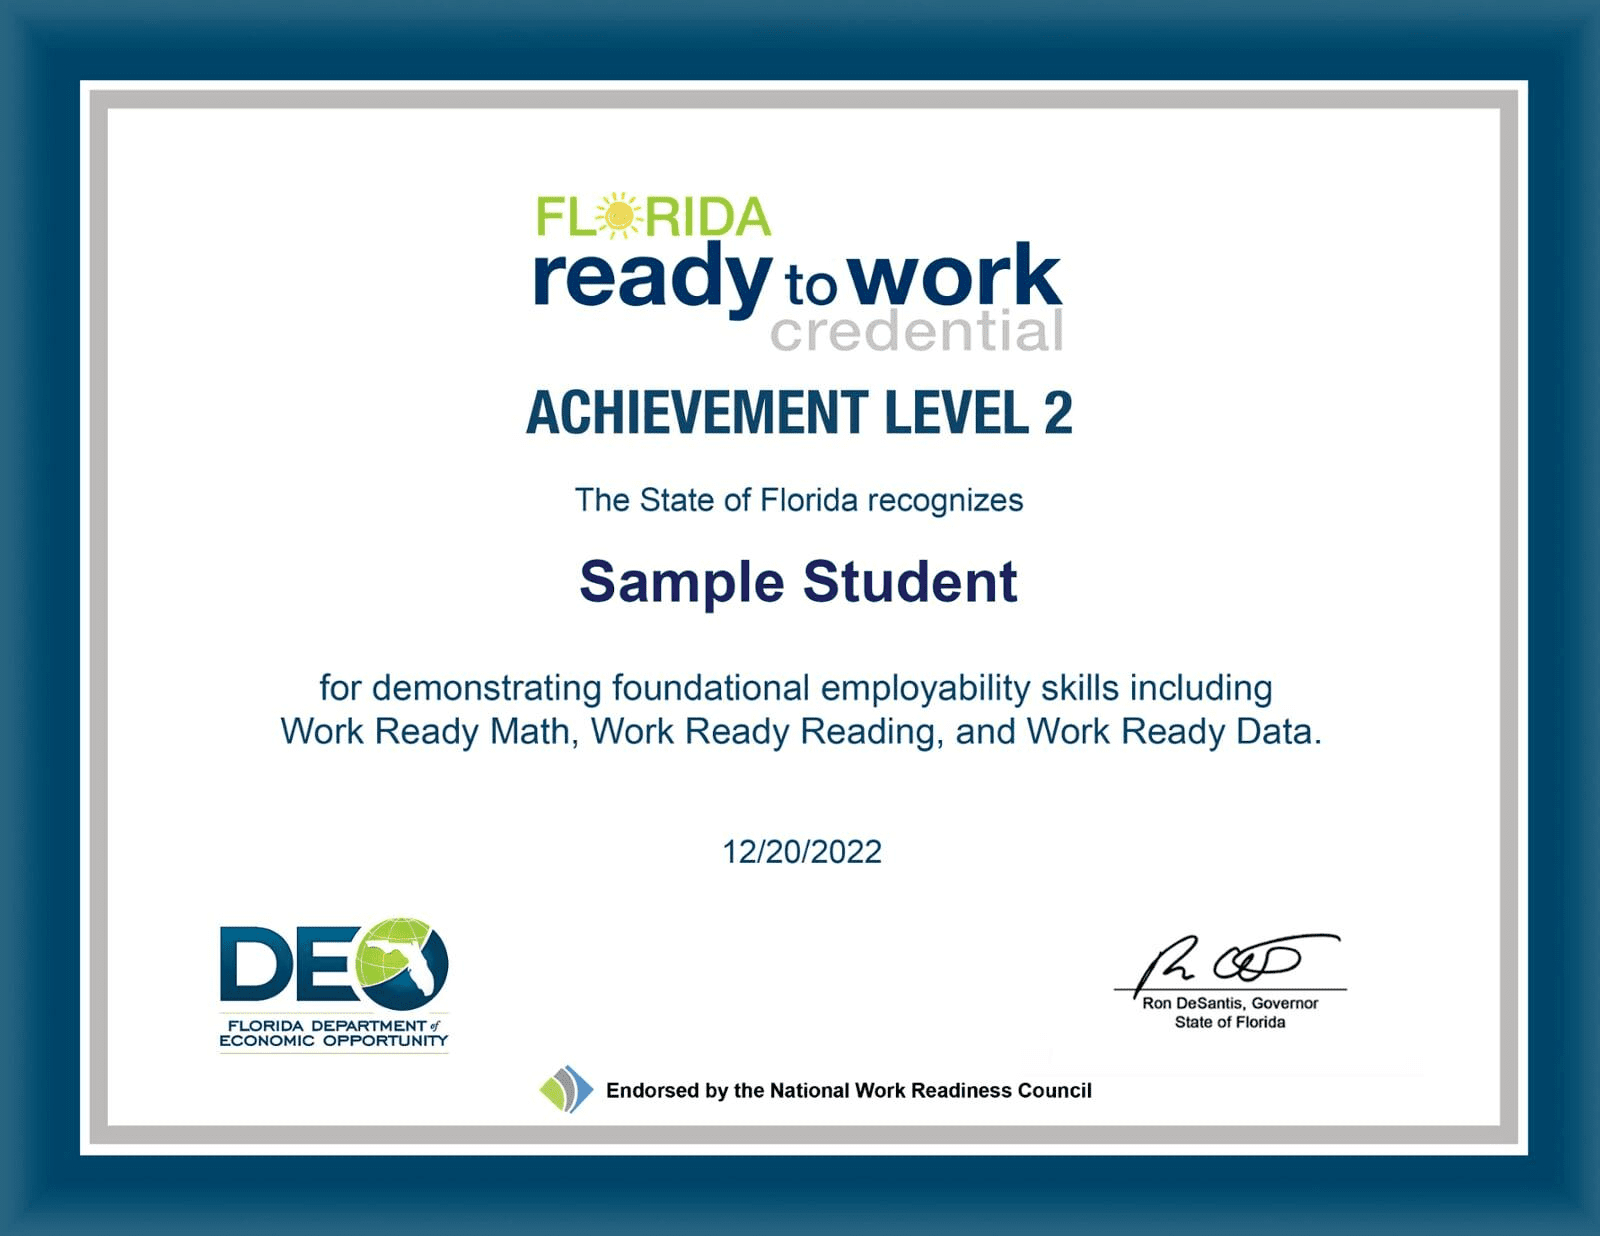 Florida Ready to Work Credential